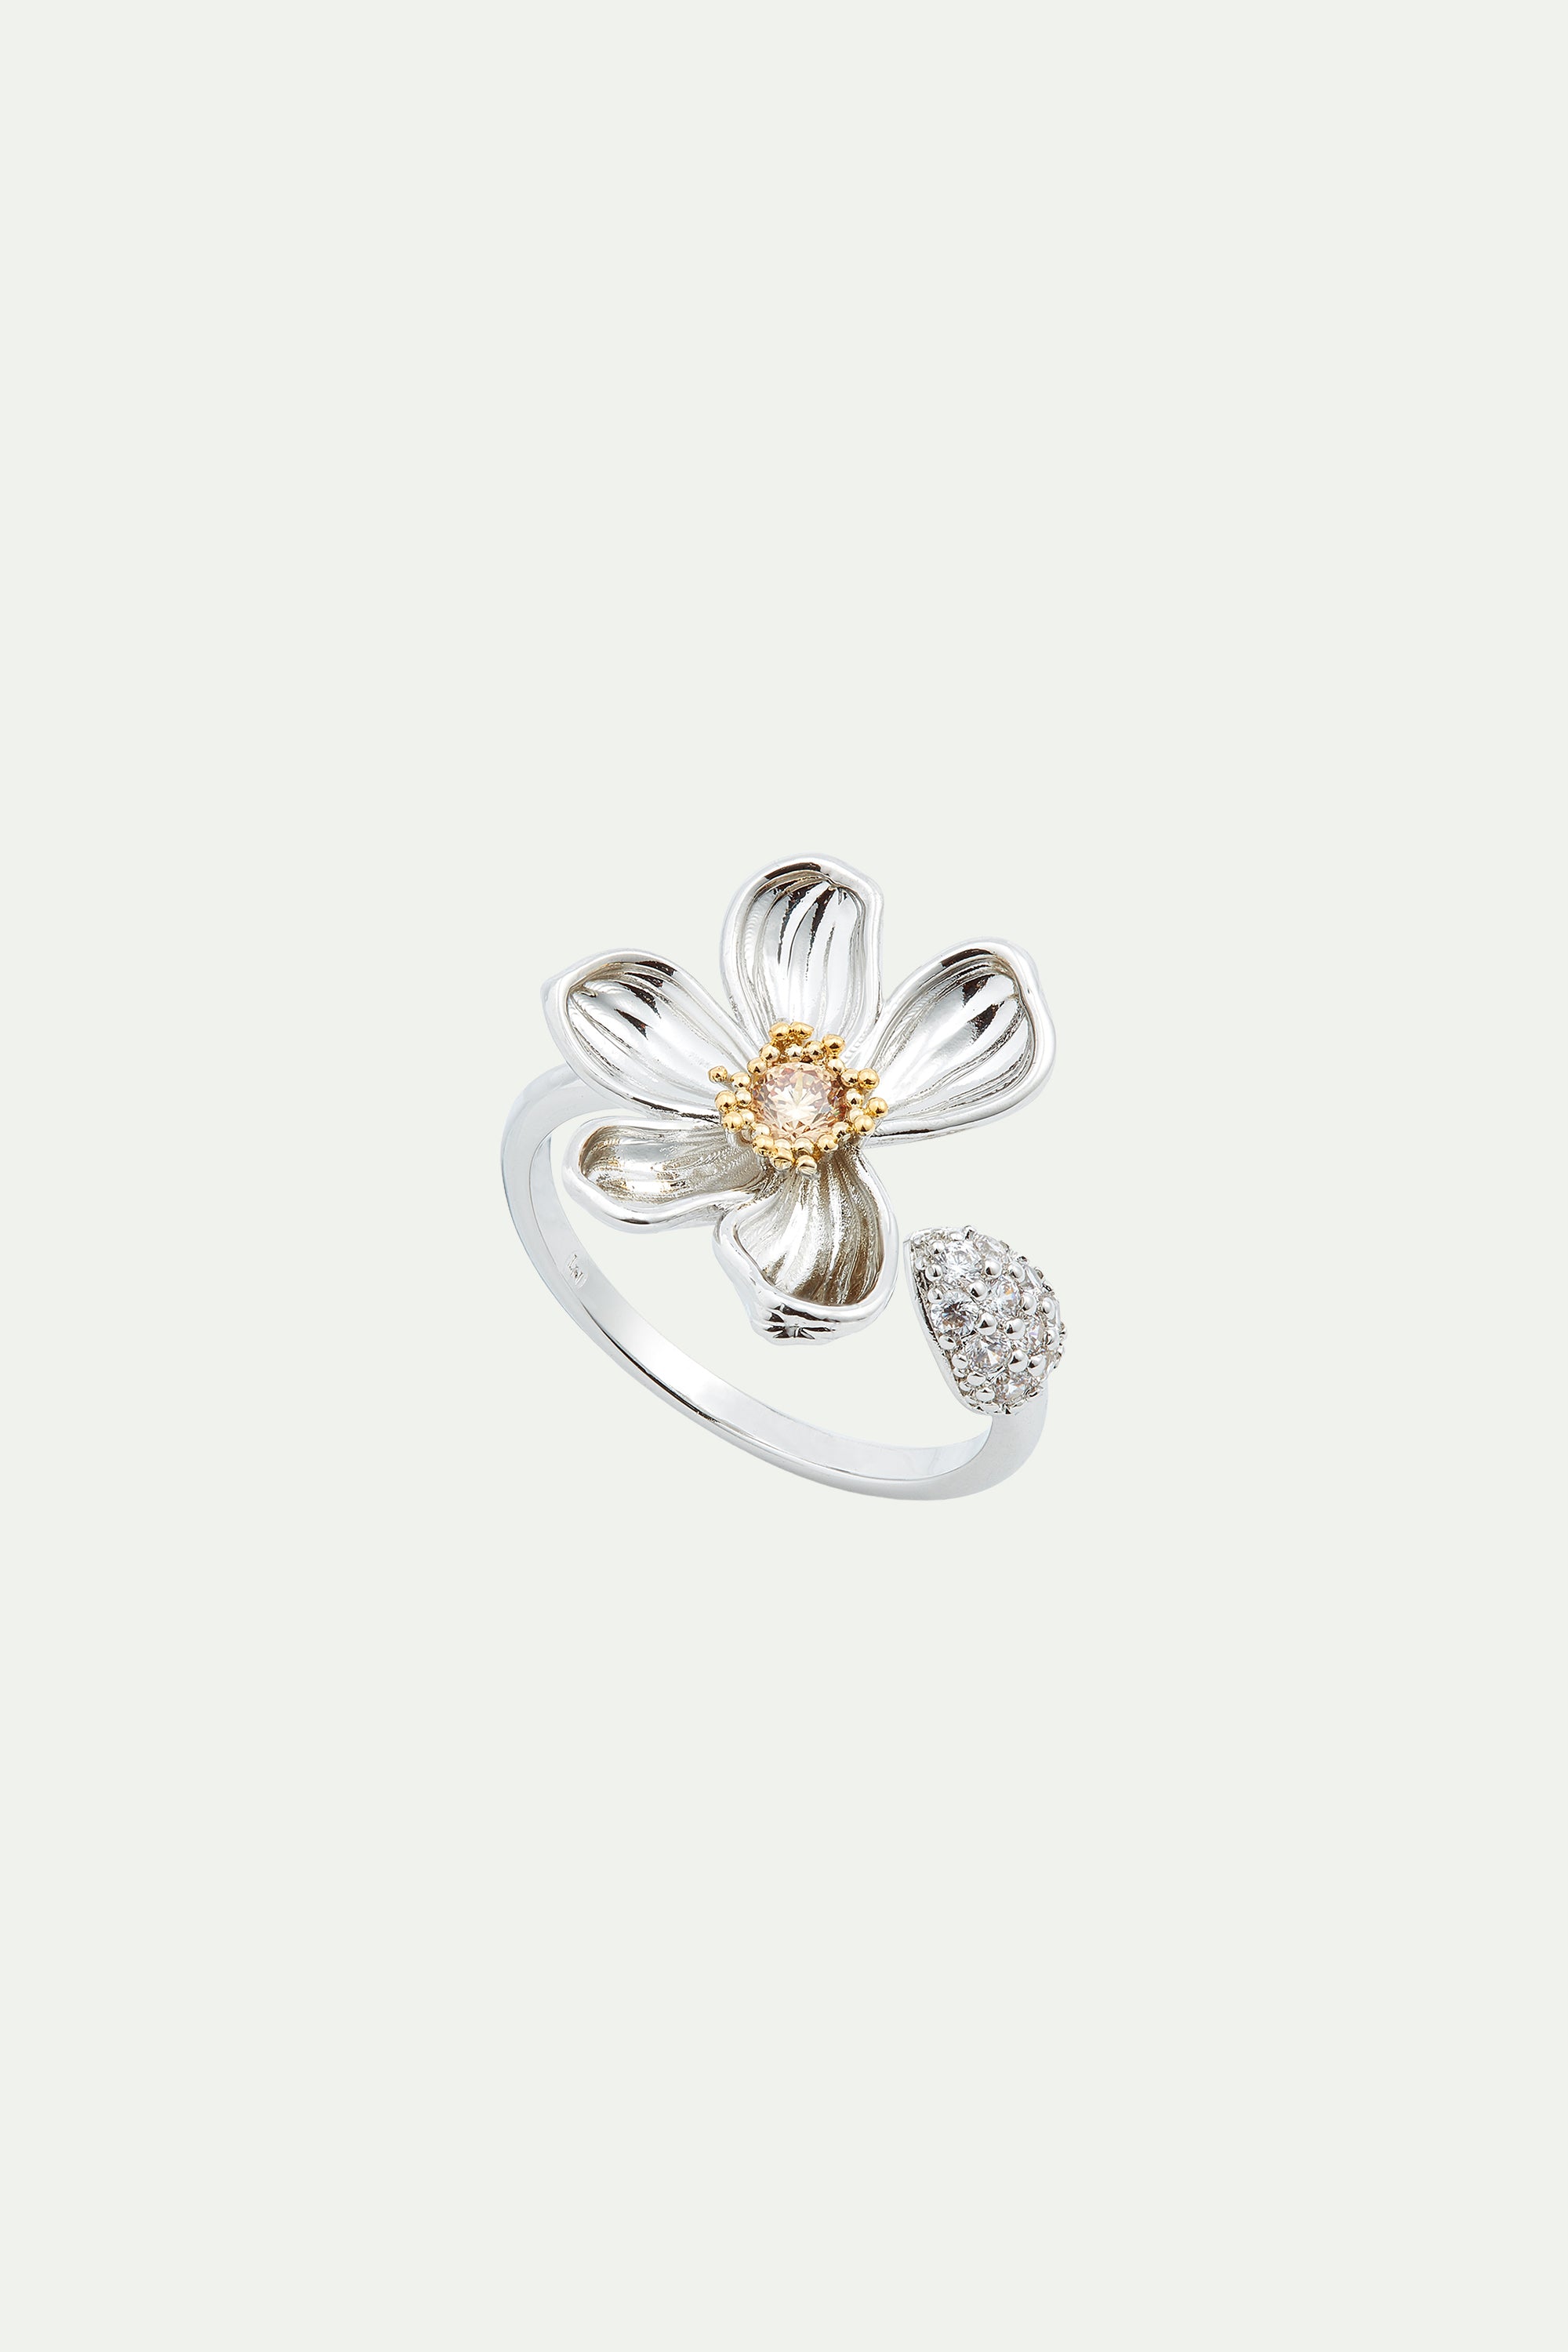 Daisy and petal paved with white crystal adjustable ring